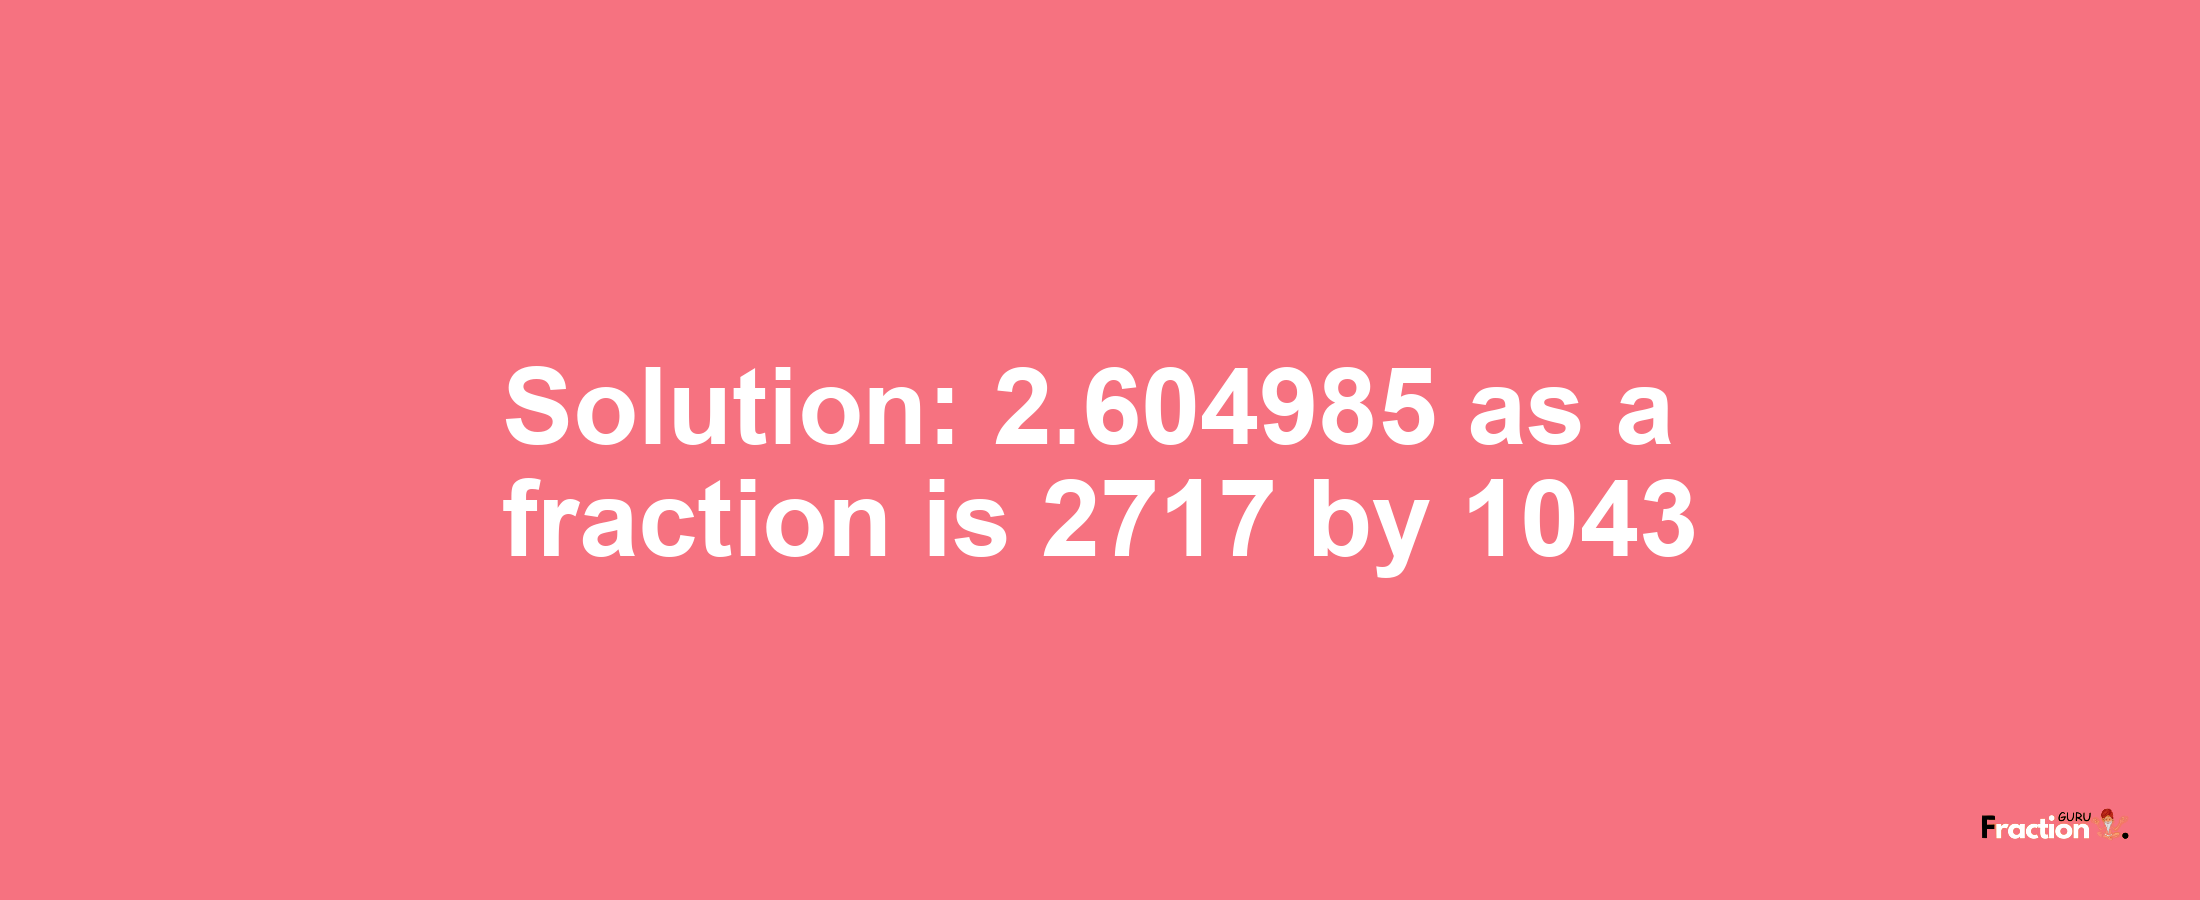 Solution:2.604985 as a fraction is 2717/1043